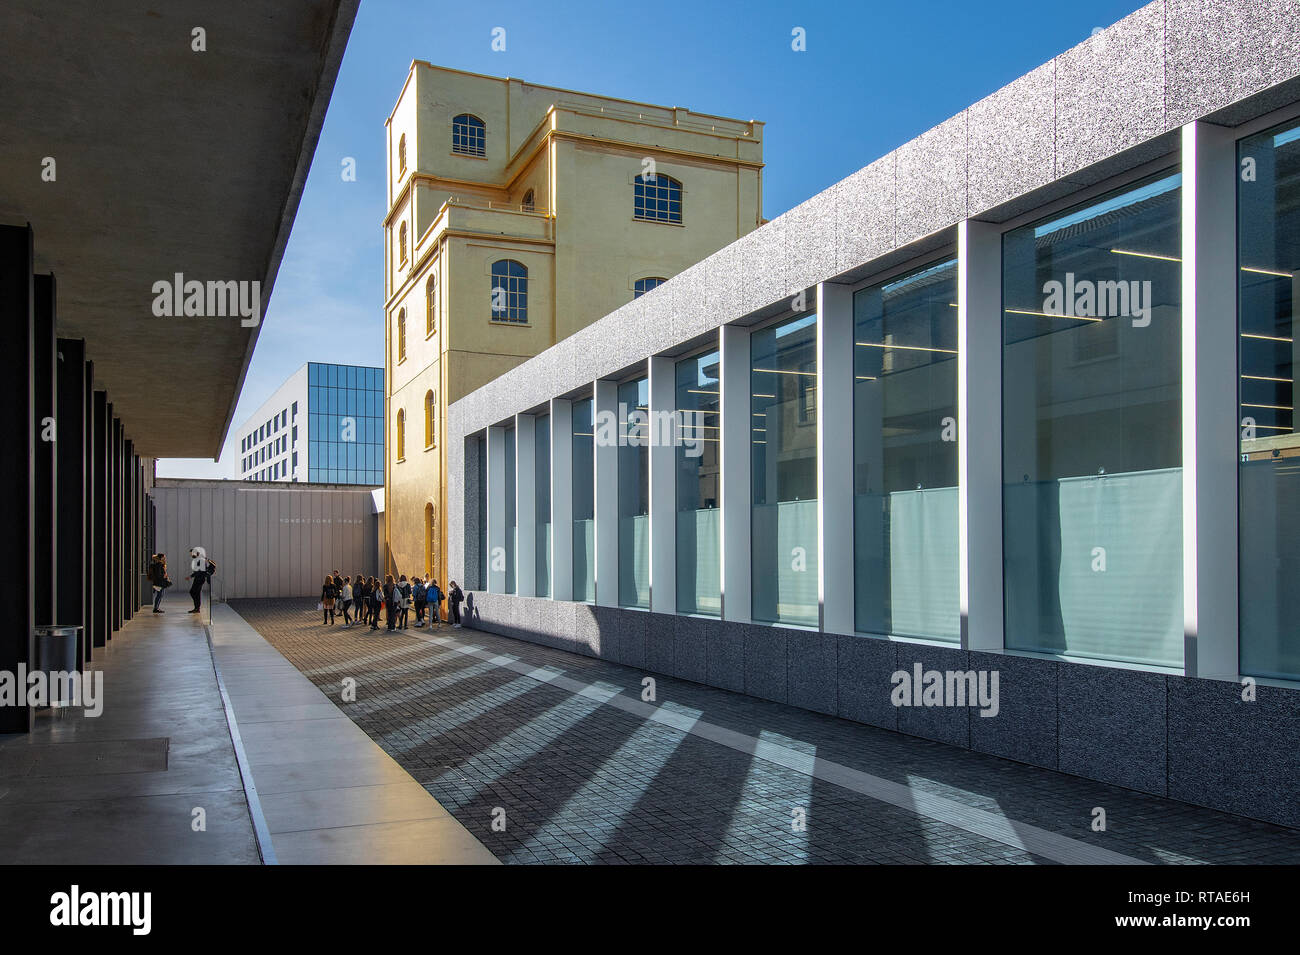 The golden building of the so-called Haunted House, Fondazione Prada, exterior, Milan, Italy Stock Photo